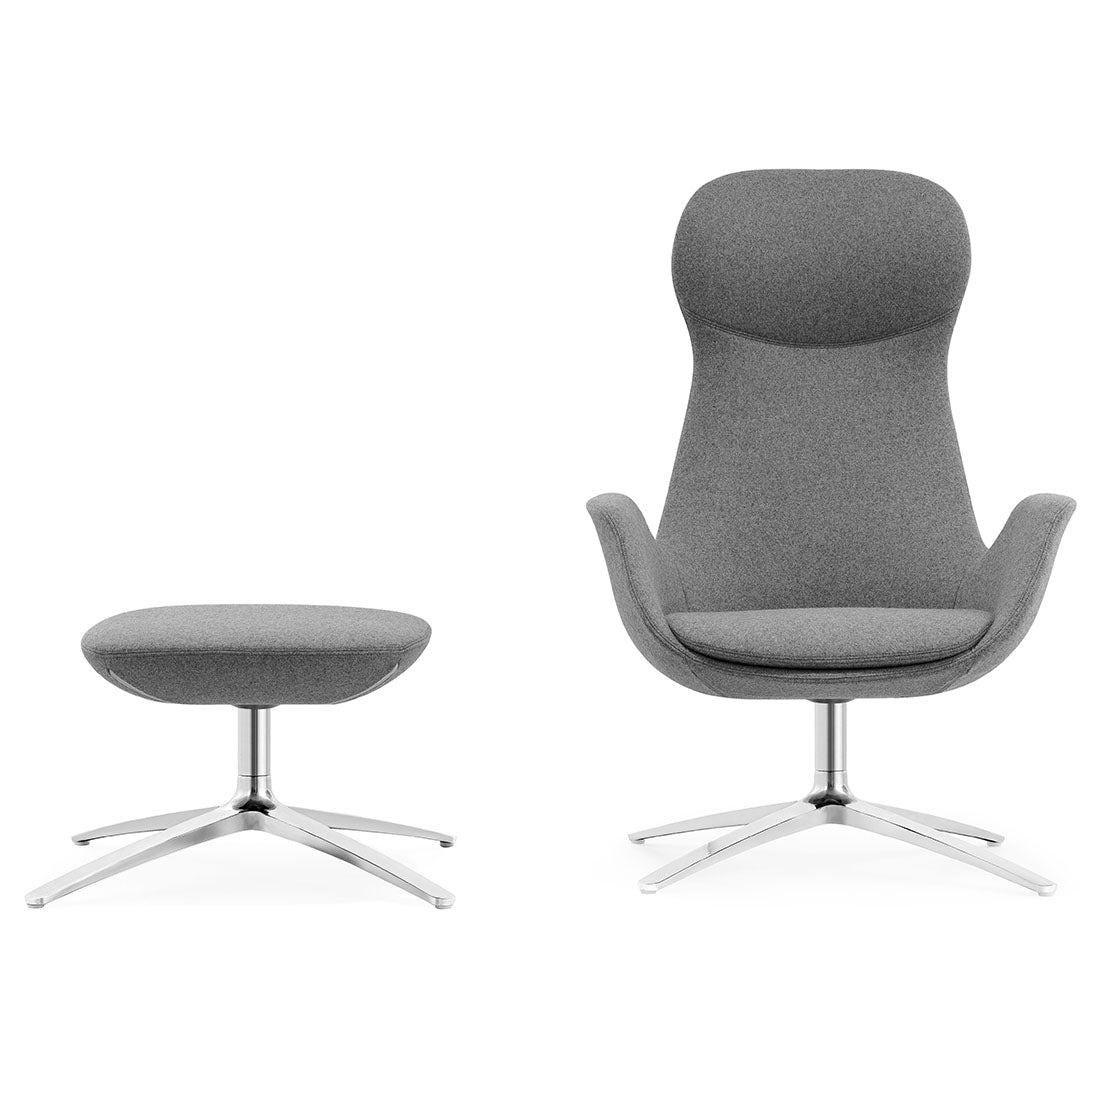 Countess Visitor Lounge Chair - switchoffice.com.au